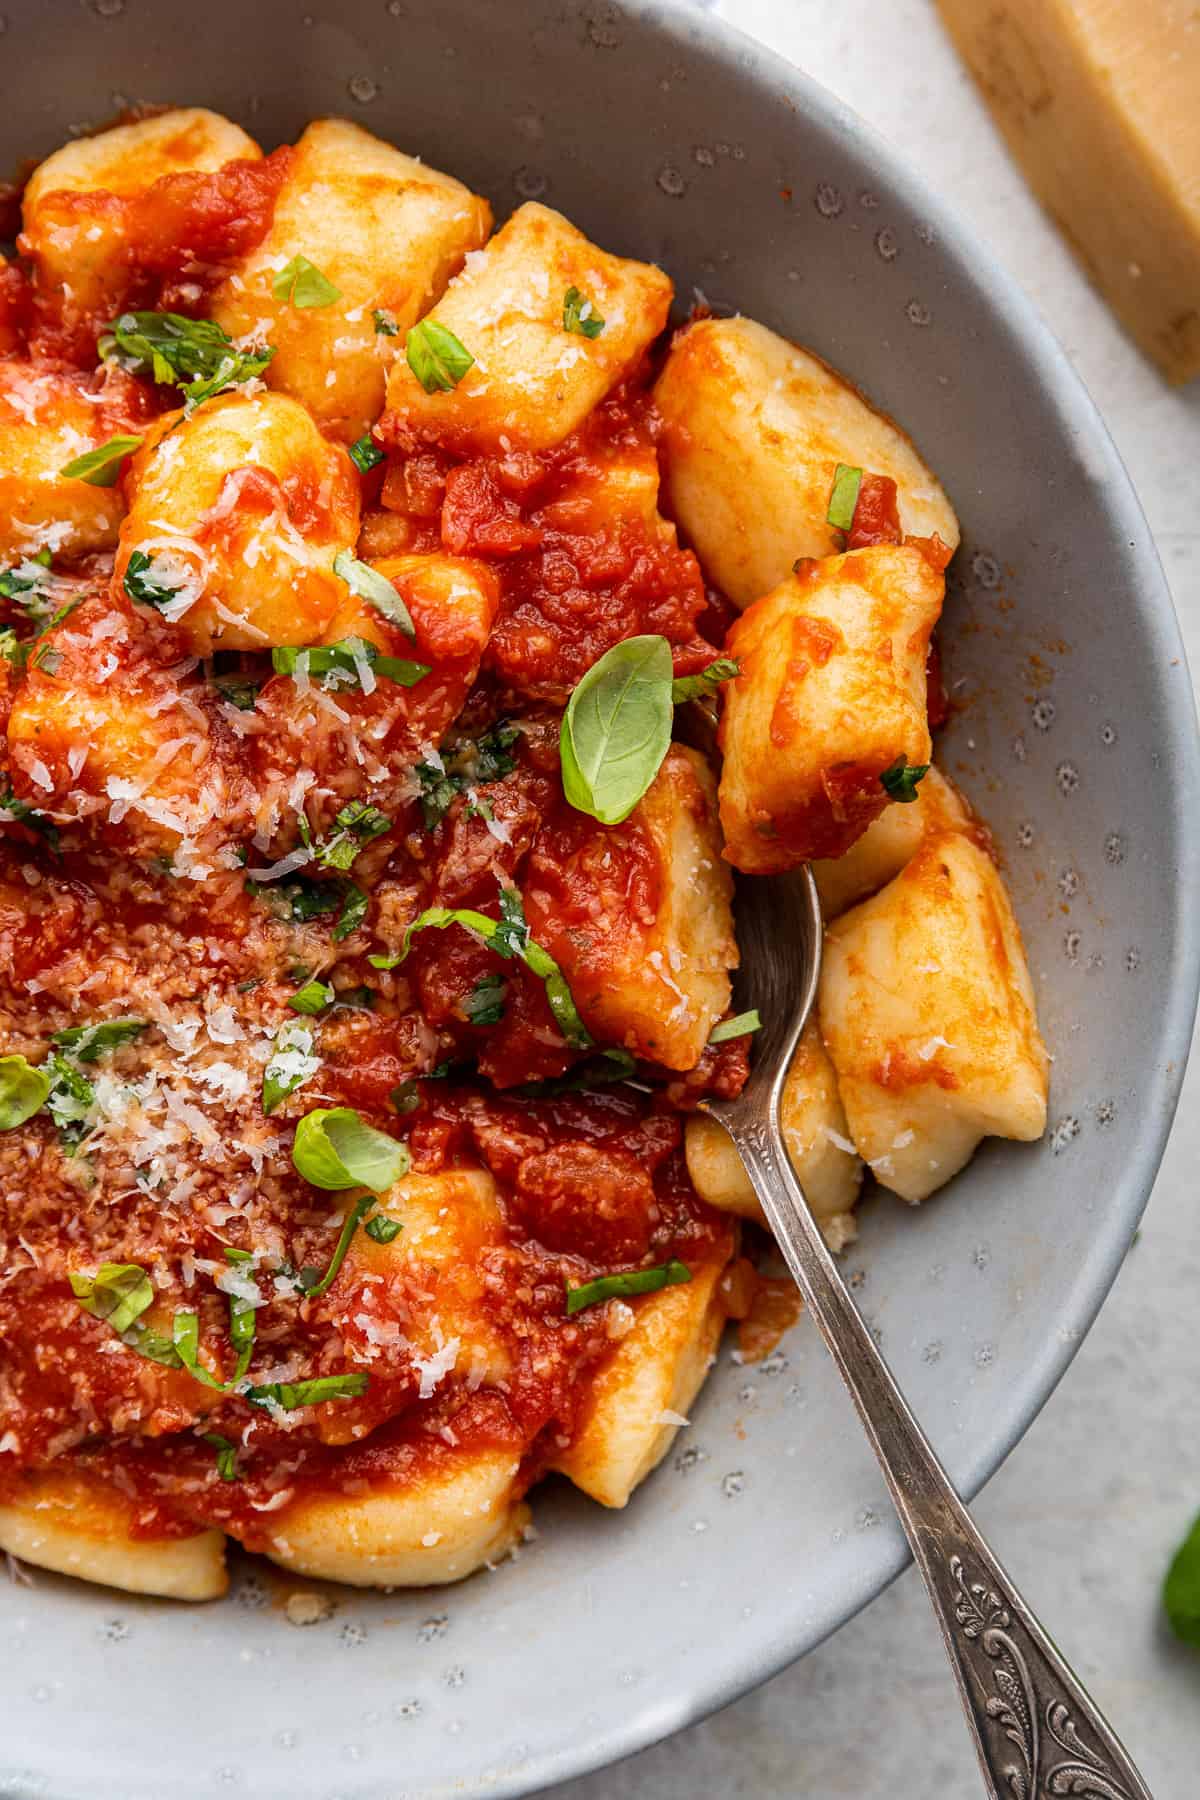 Potato gnocchi in bowl garnished with basil and cheese.